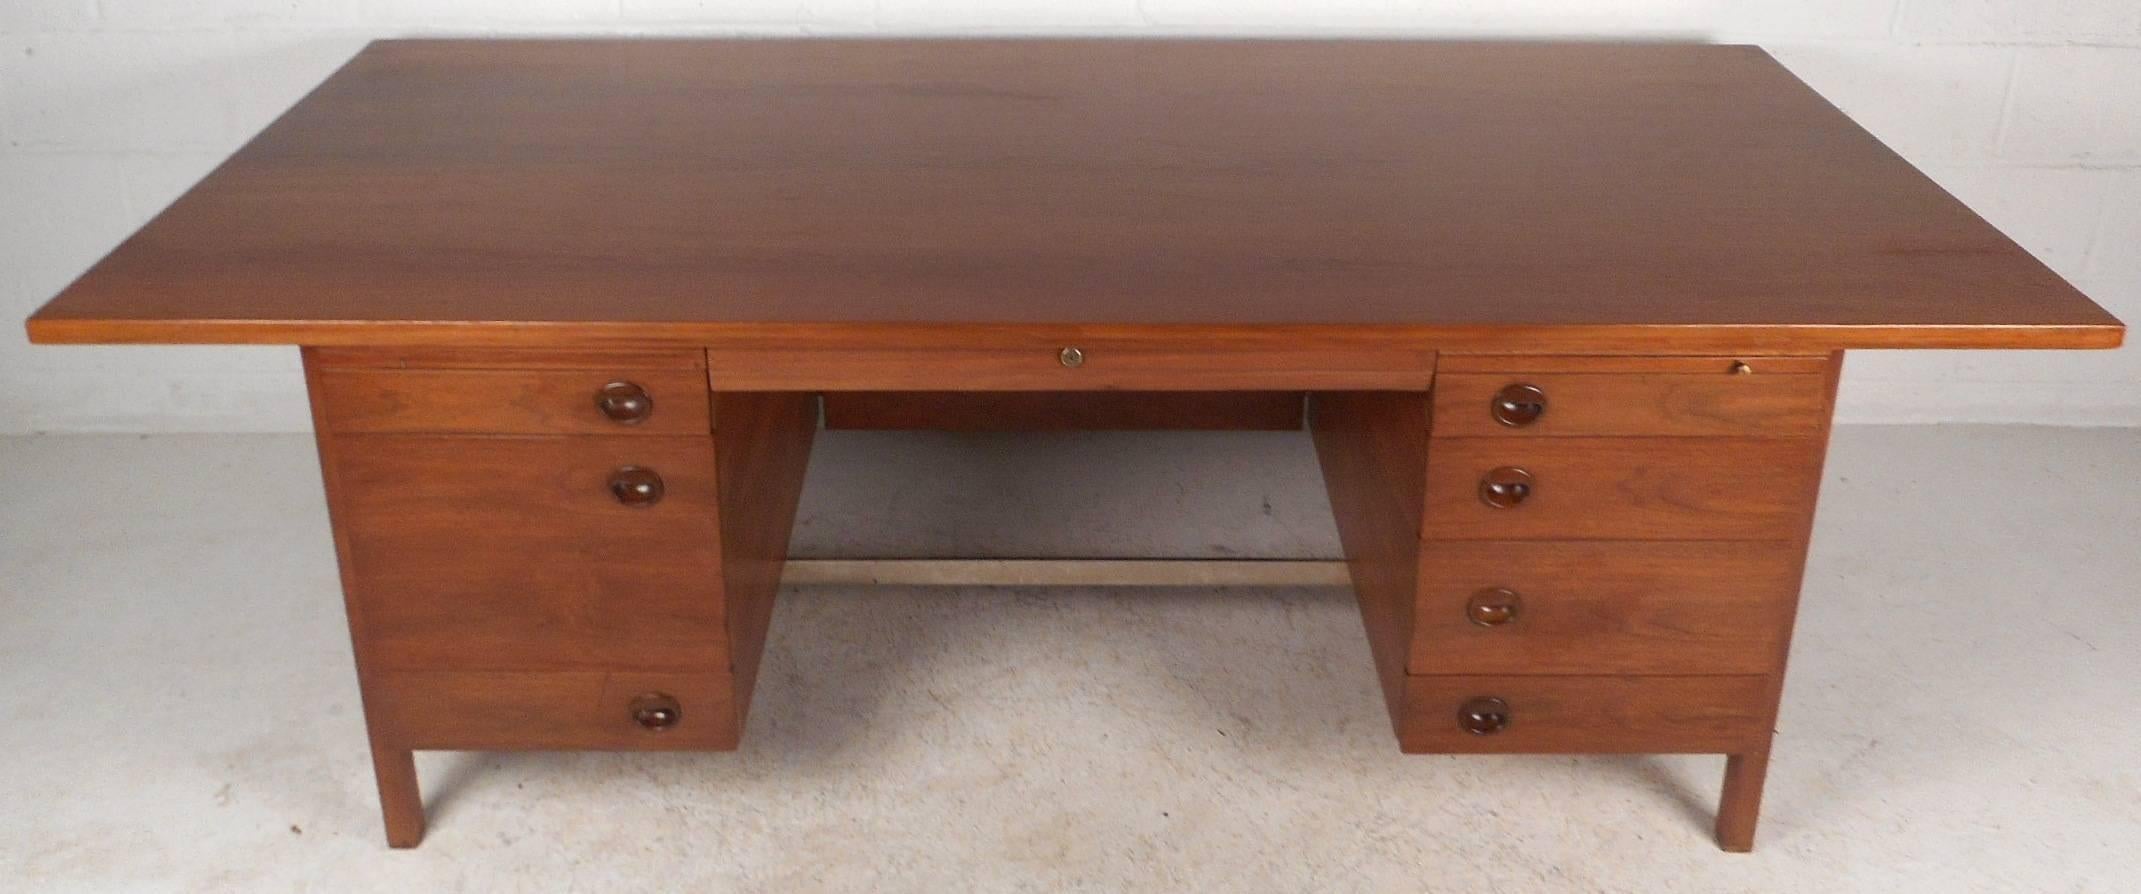 This beautiful vintage modern executive desk has an oversized work space with eight drawers and two pull out trays. Unique dark walnut recessed circular pulls, a metal stretcher, and a finished back show true quality craftsmanship. This elegant